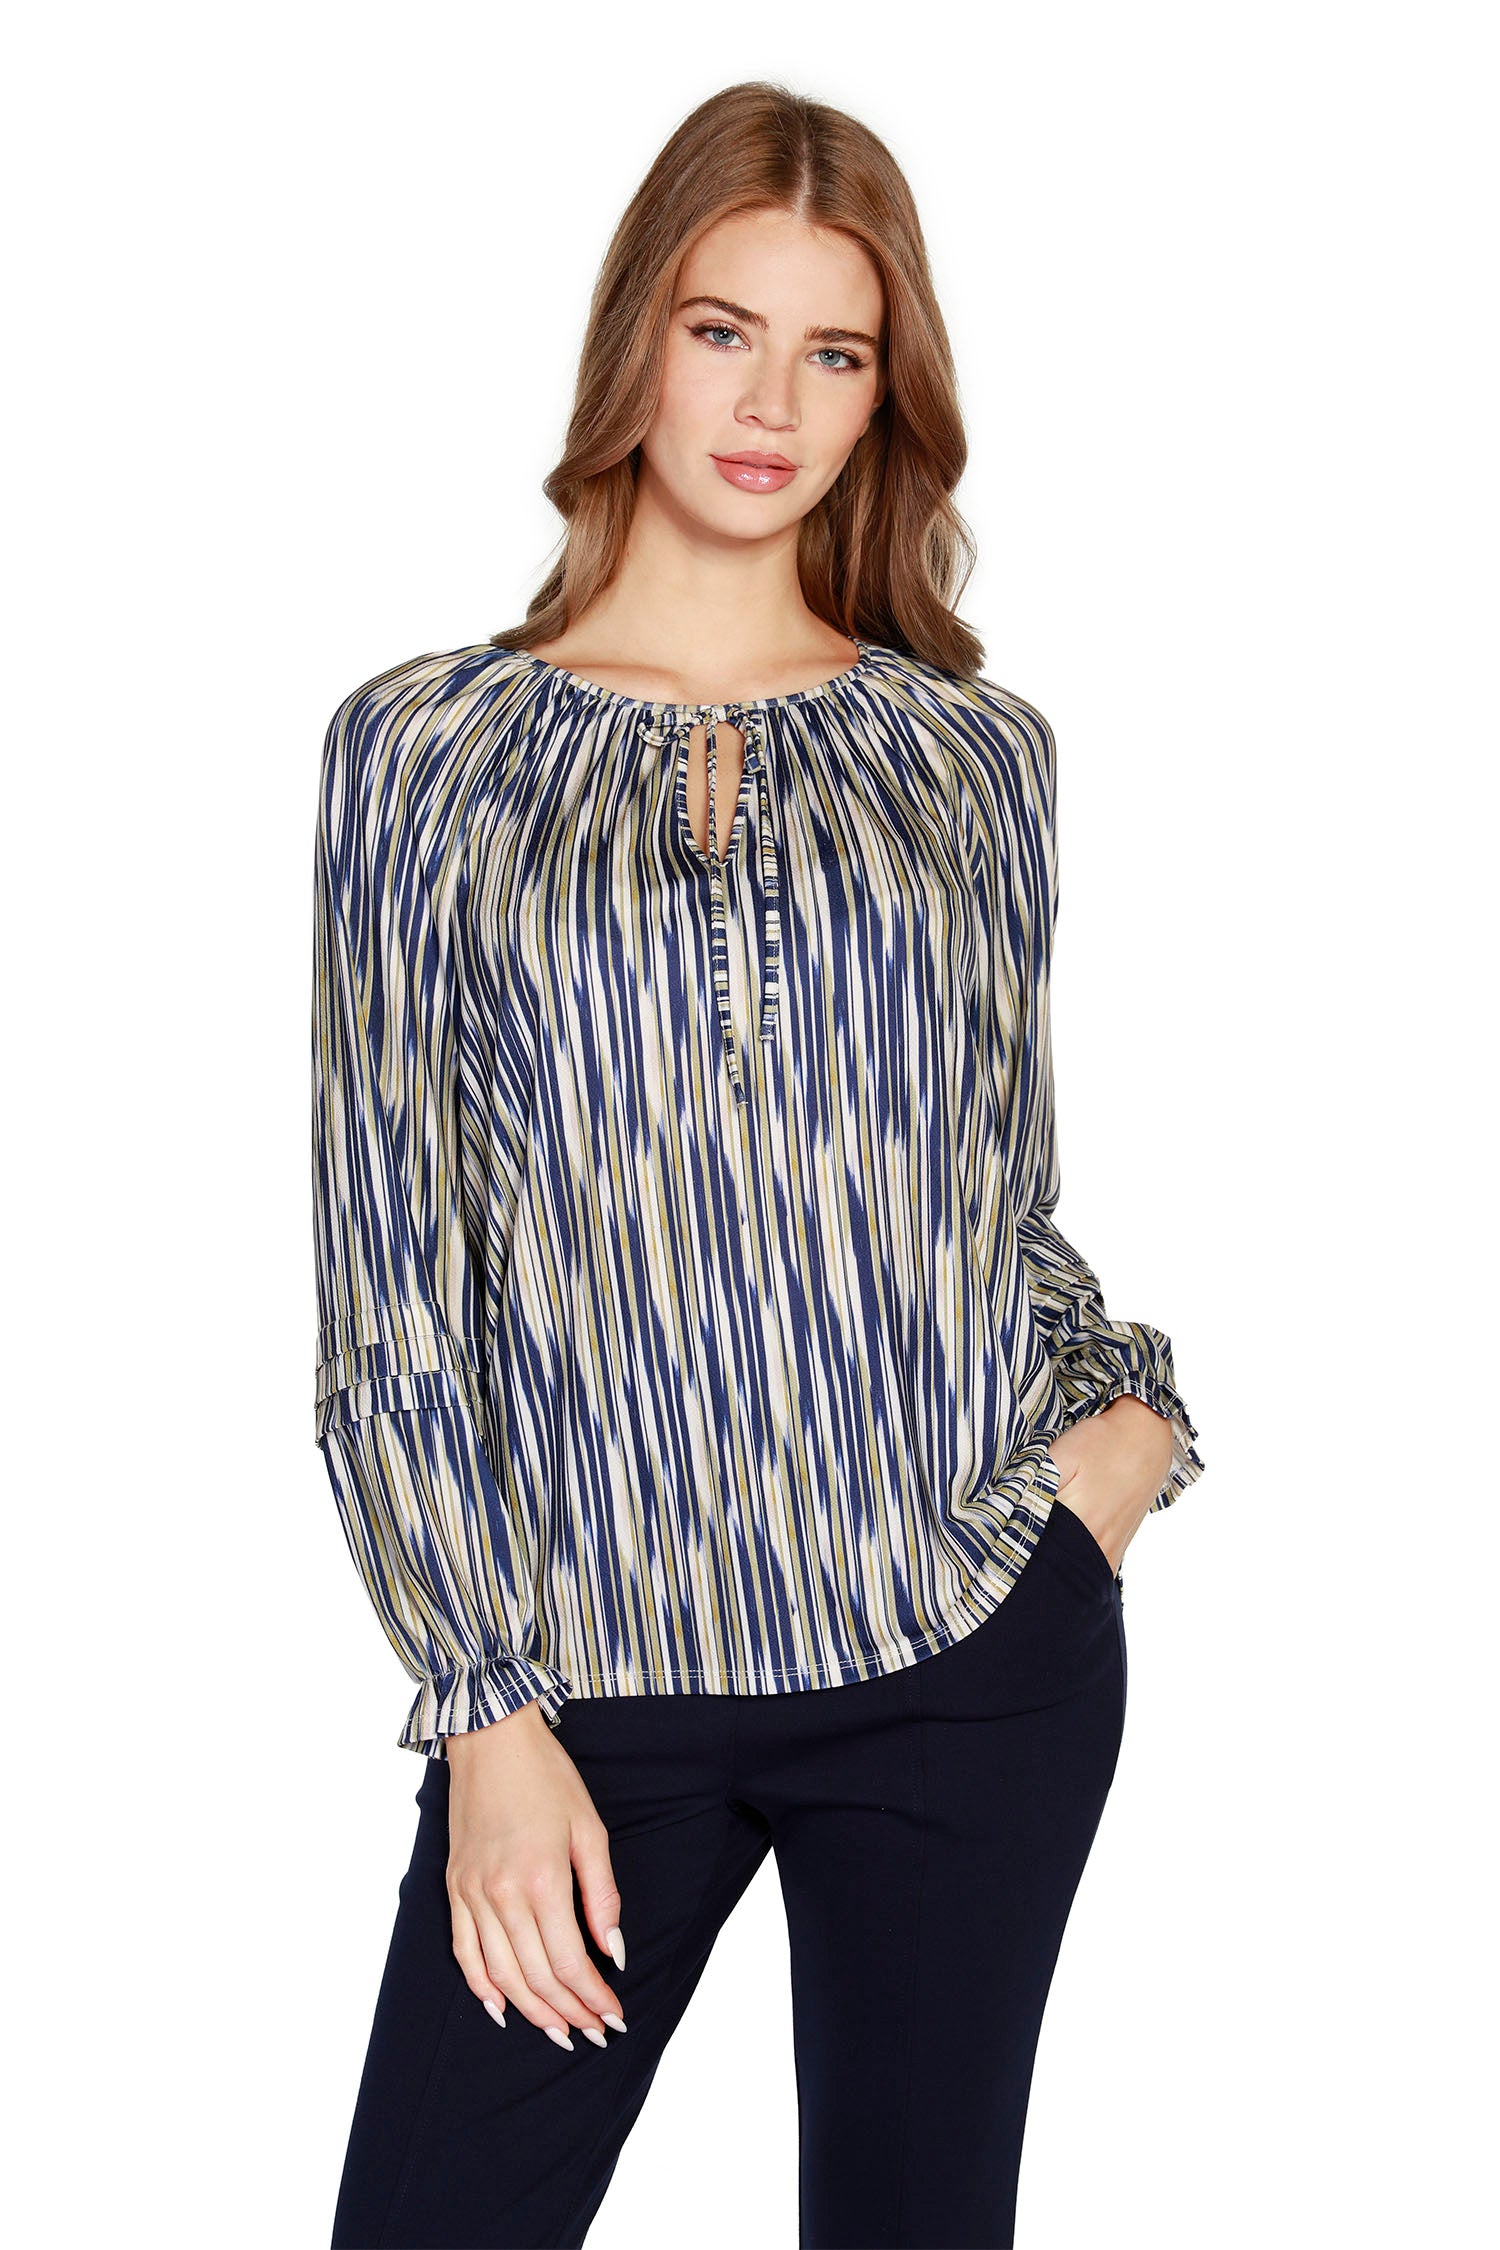 Women's Striped Knit Raglan Peasant Top with Keyhole Neck  |  LAST CALL